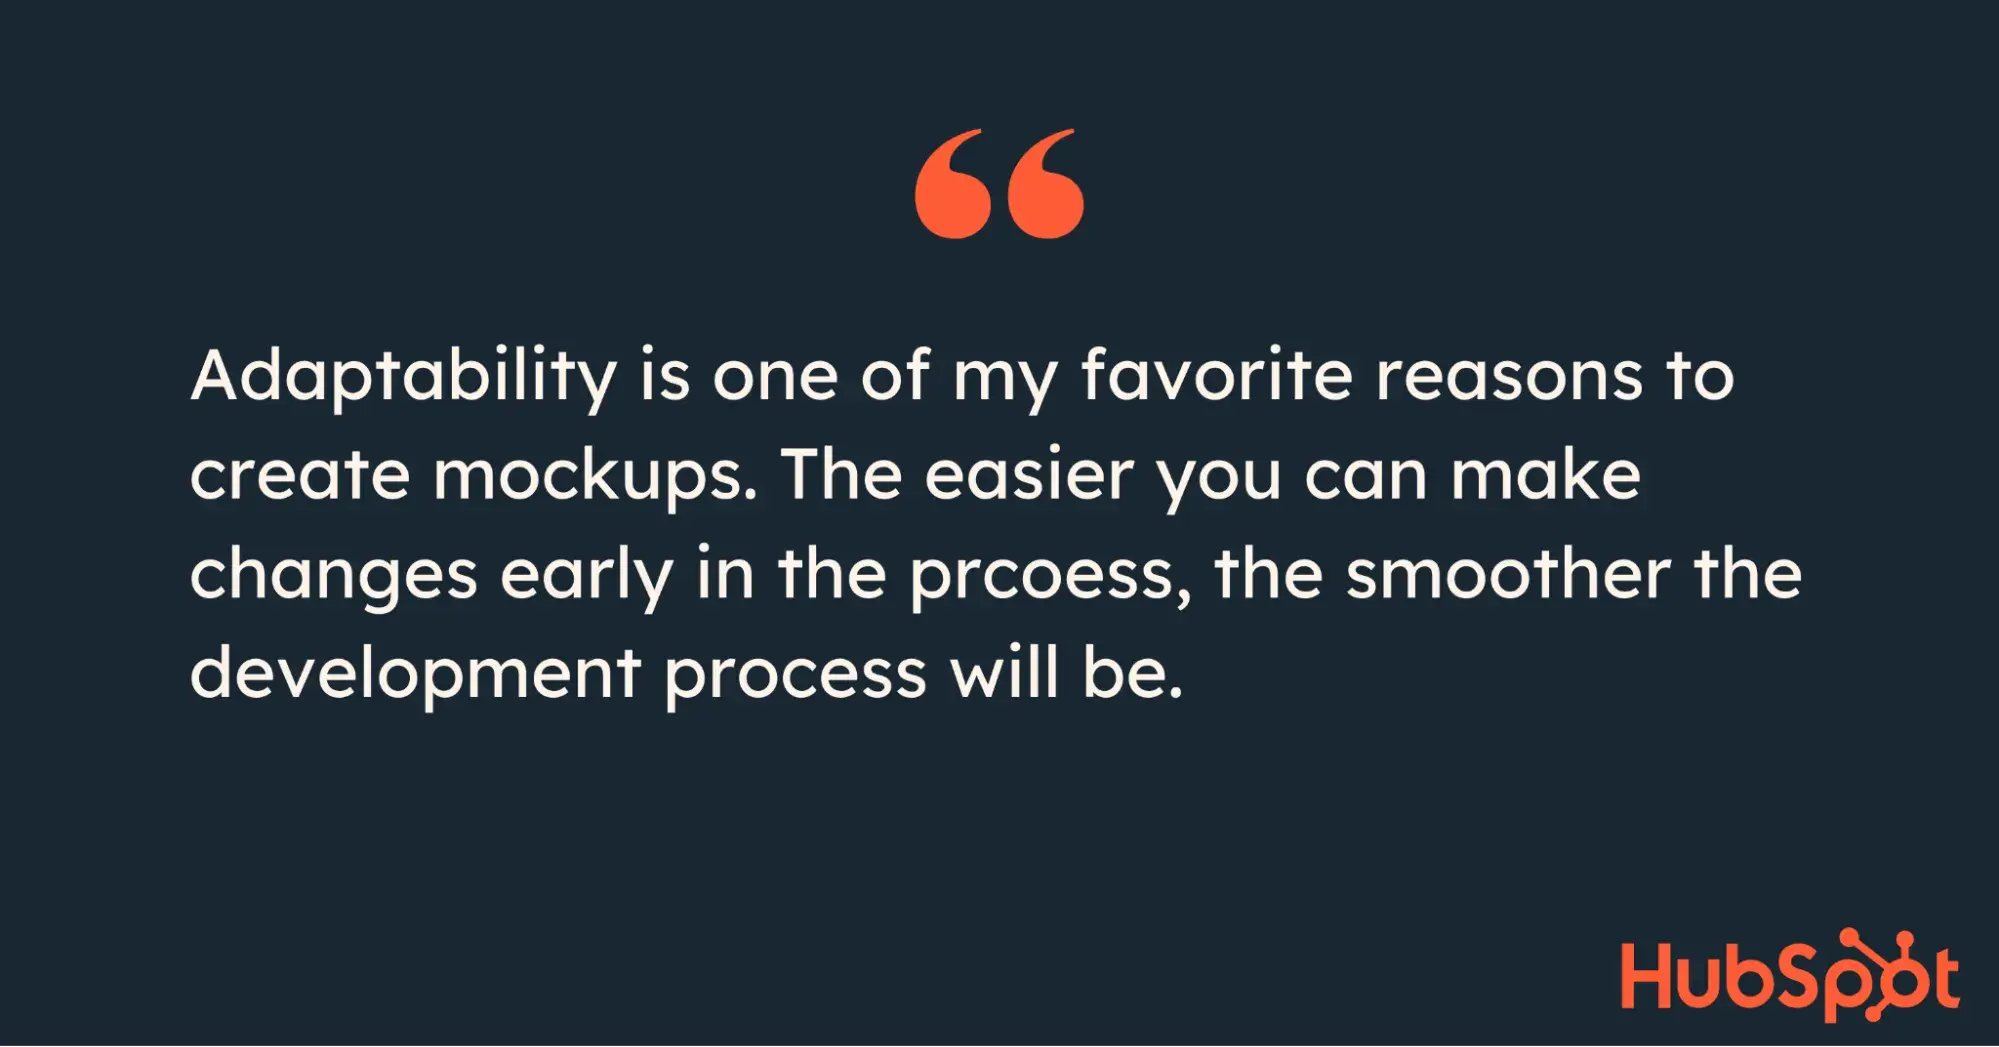 pull quote from post about usefulness of website mockups